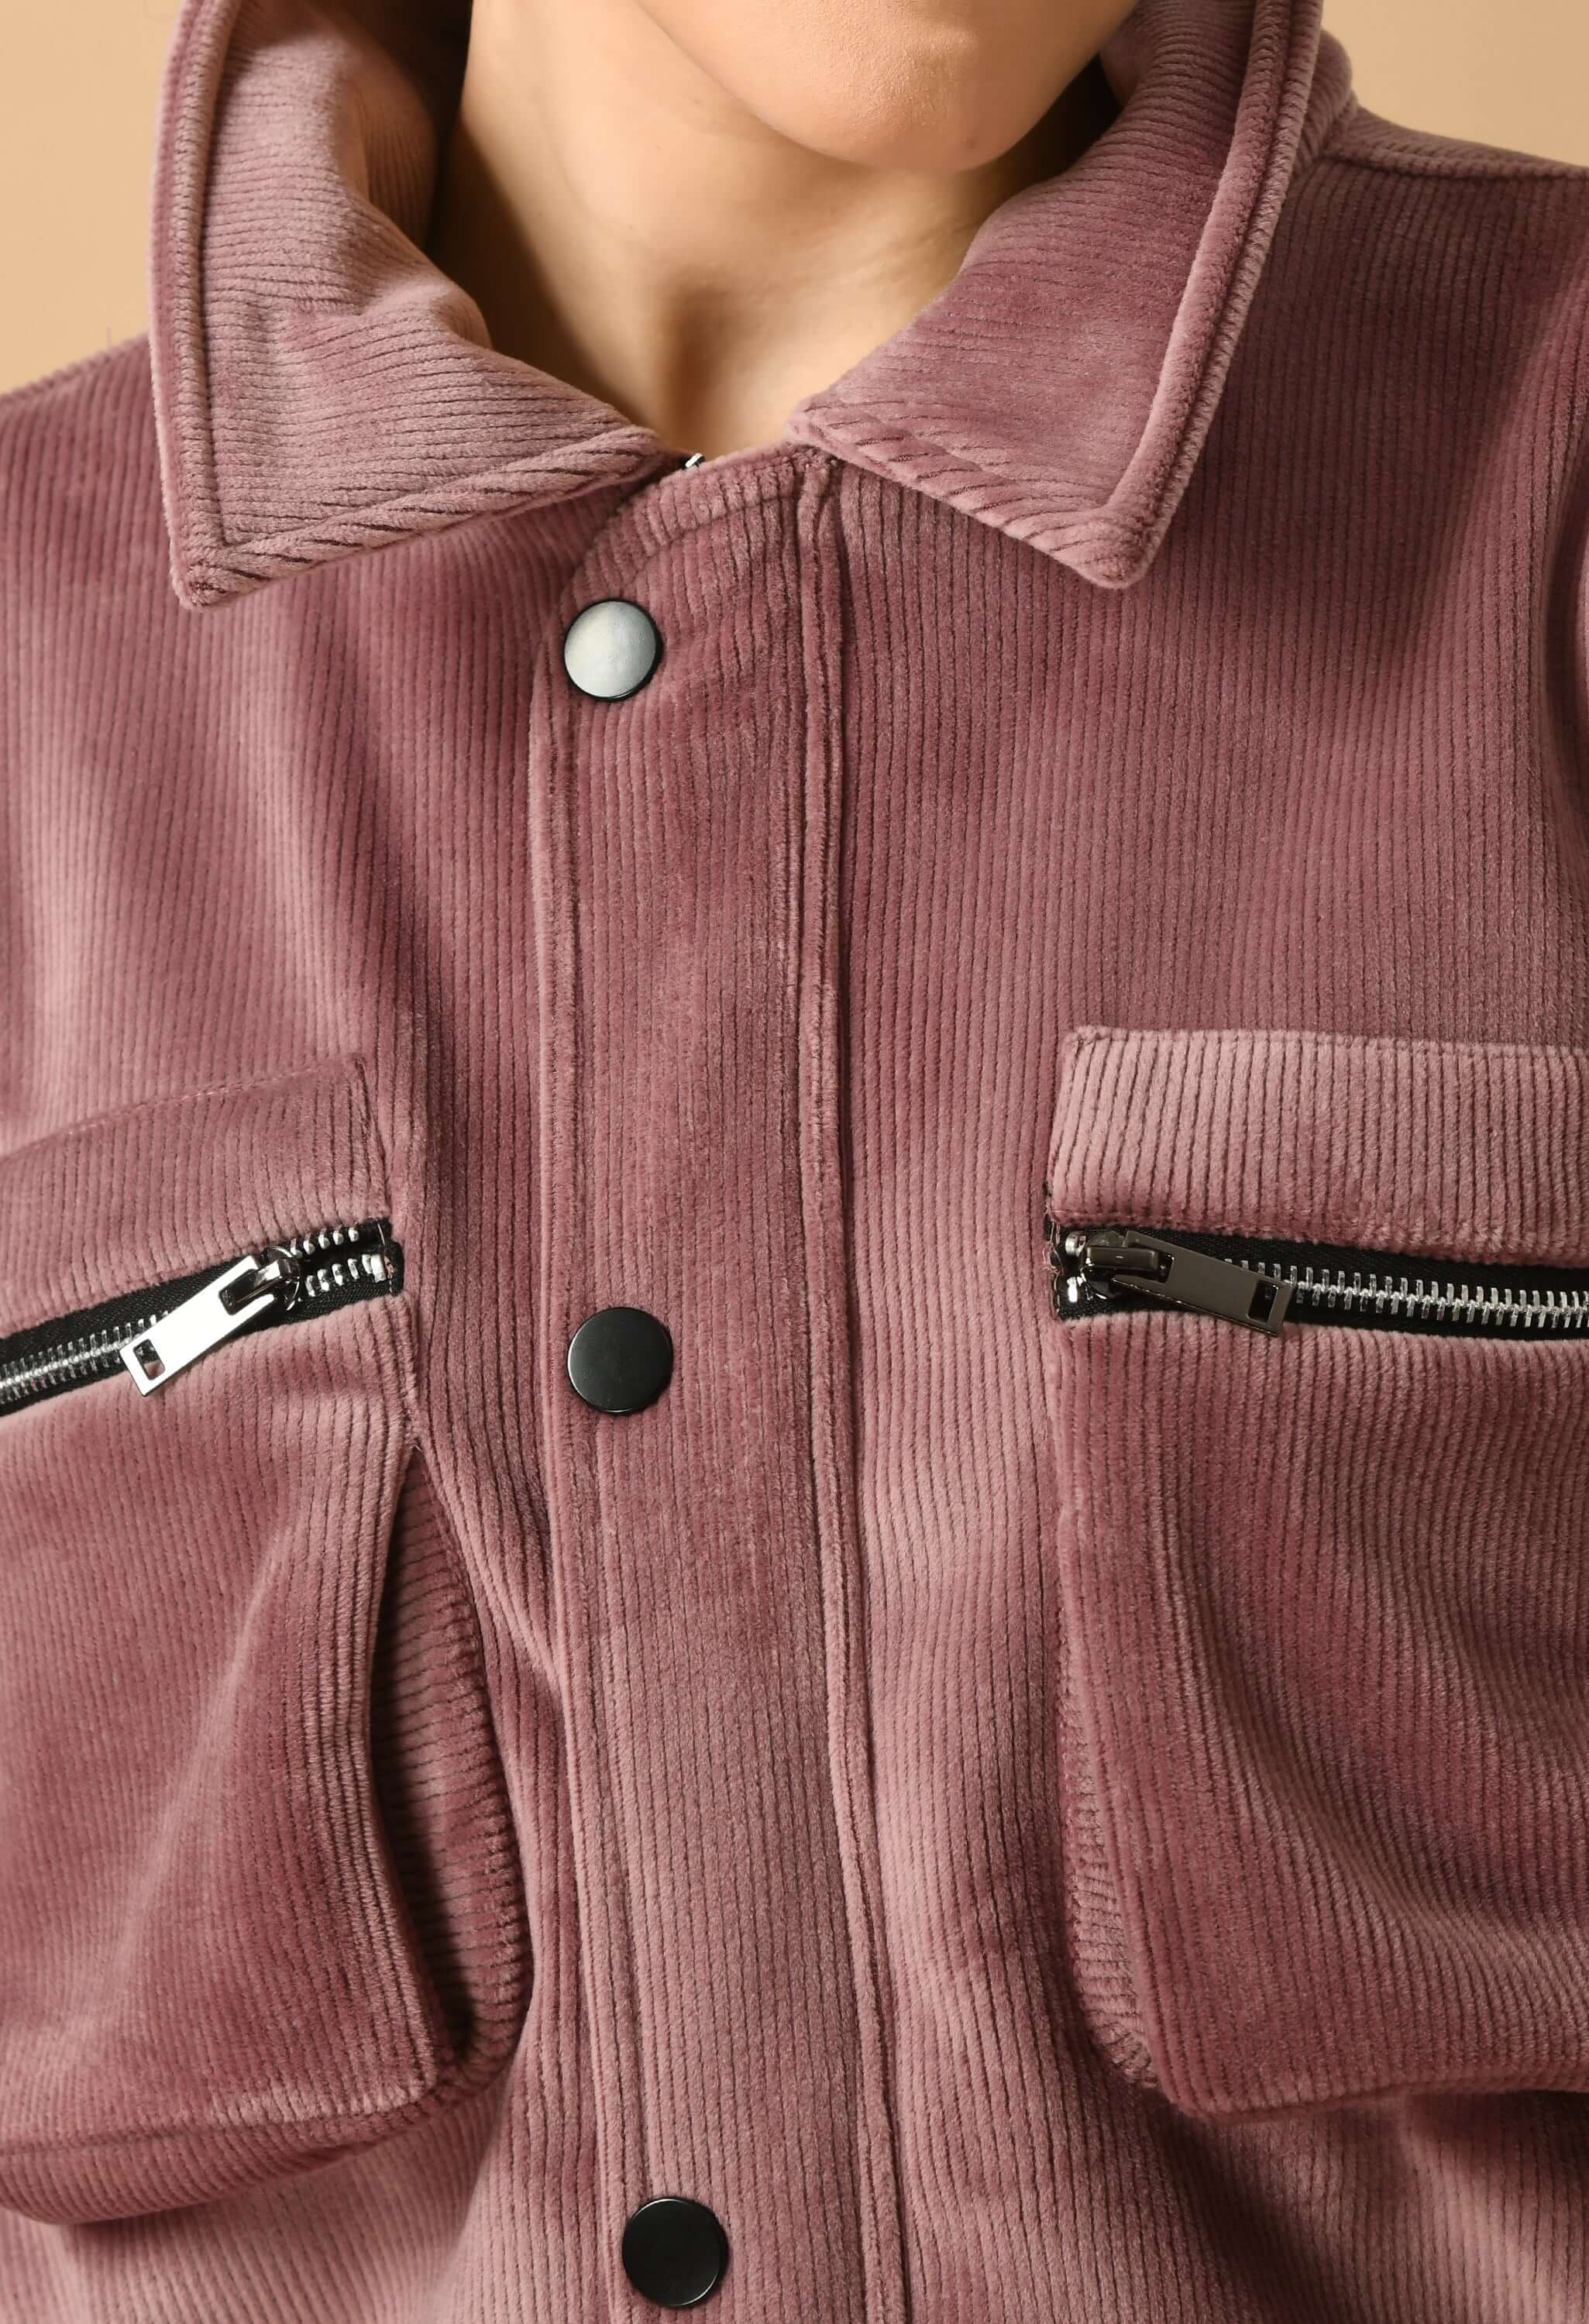 Mauve Corduroy Jacket By Offmint